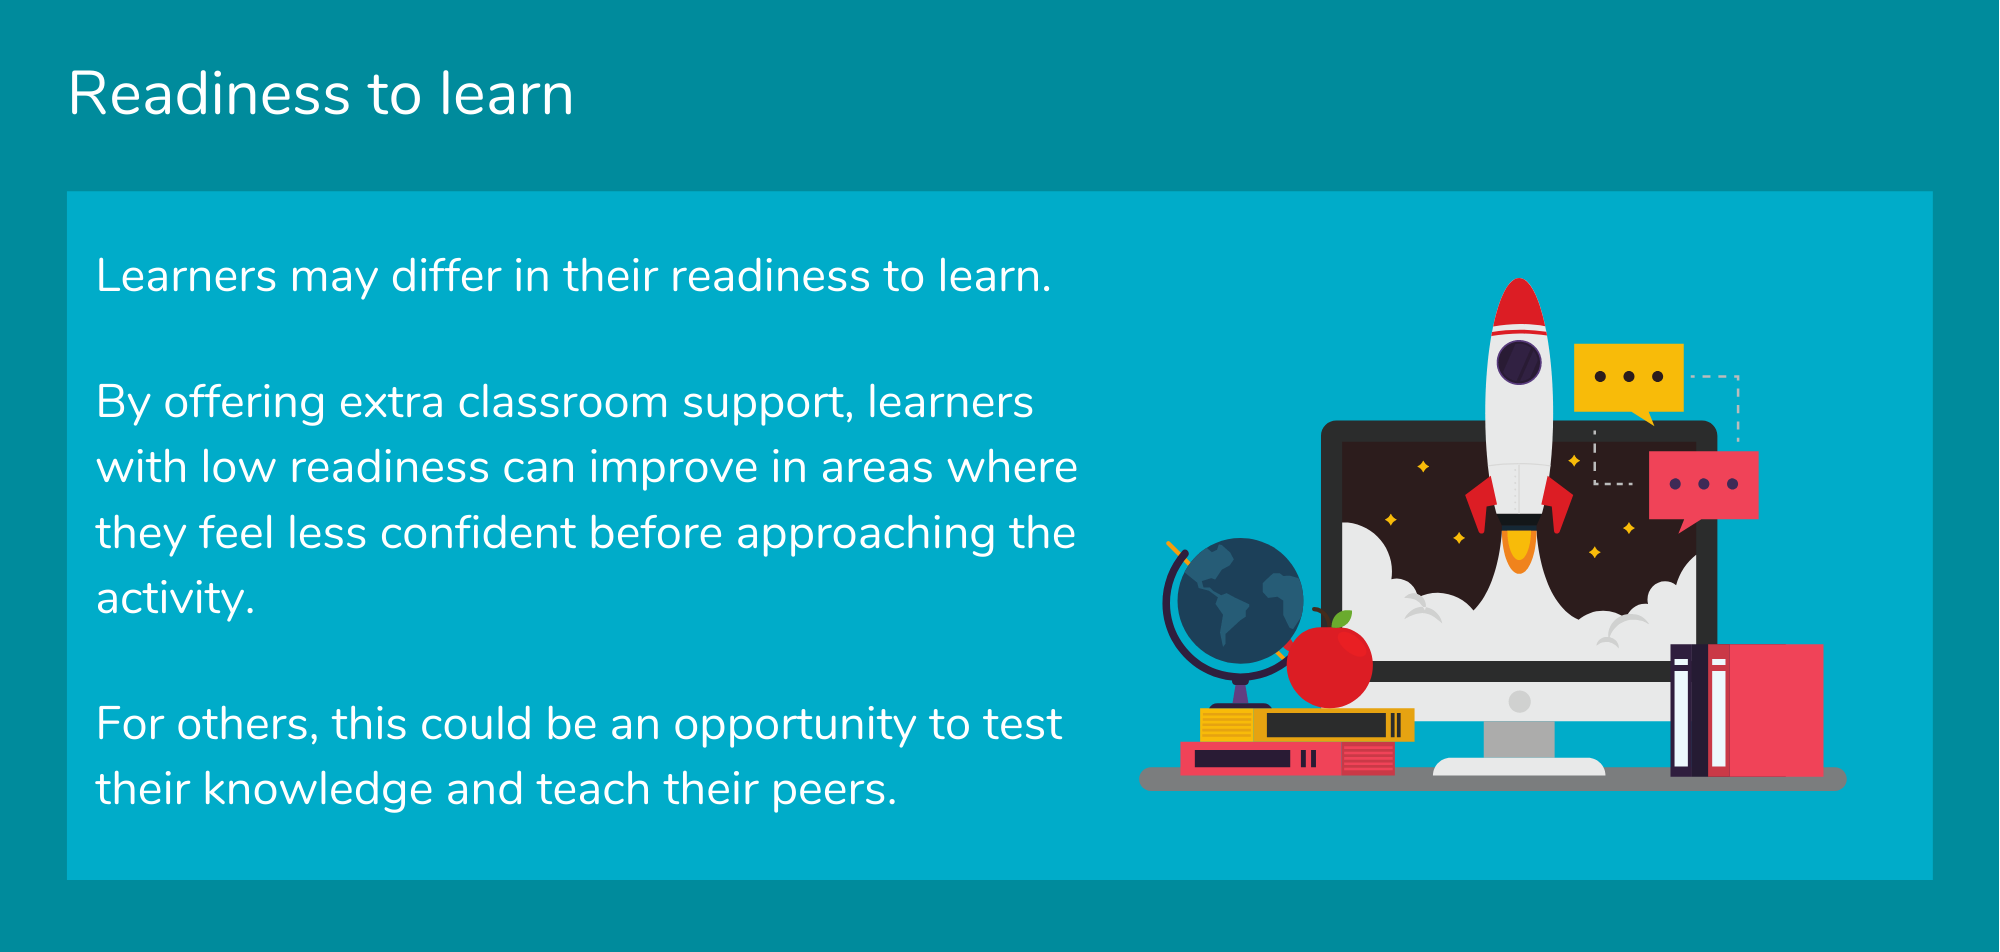 Readiness to learn tip